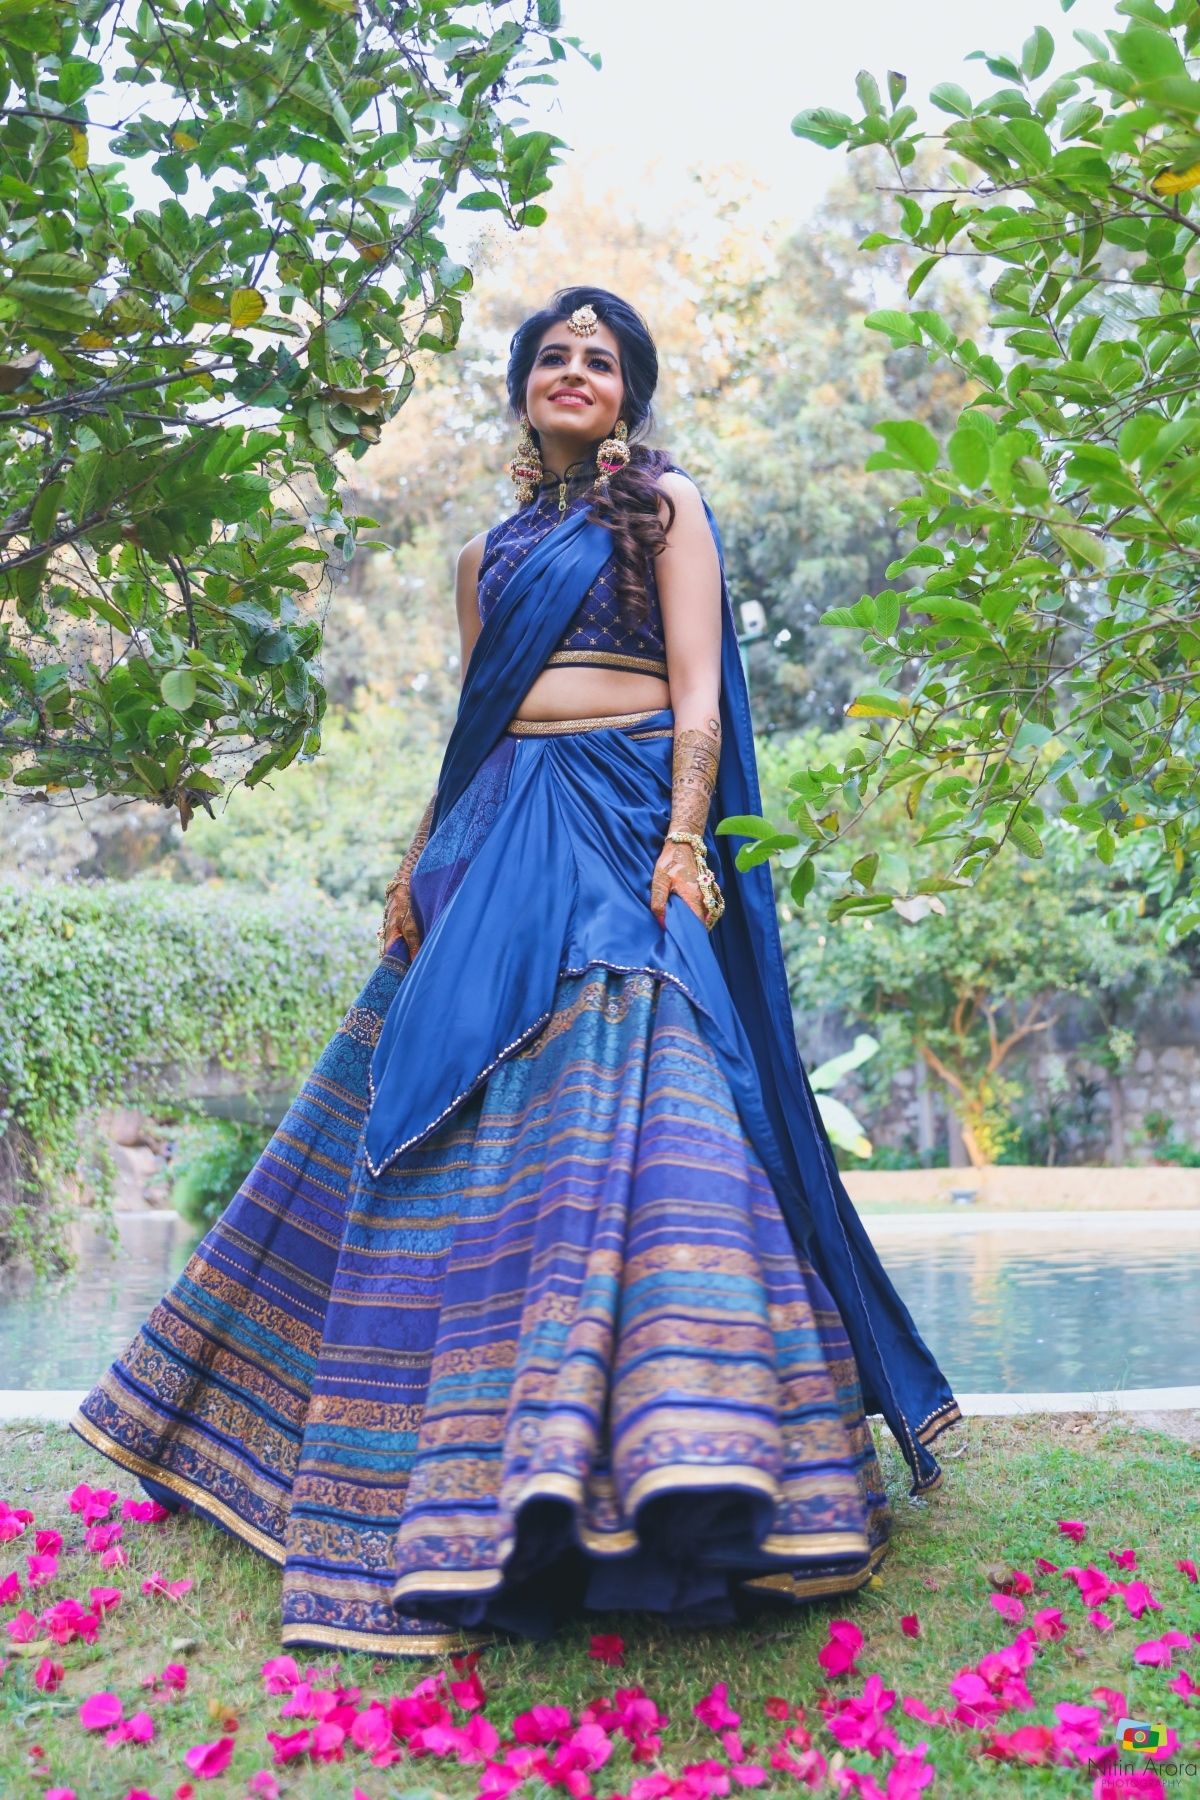 All The Shades Of Blue – Blue Lehengas That Took Our Breath Away ...